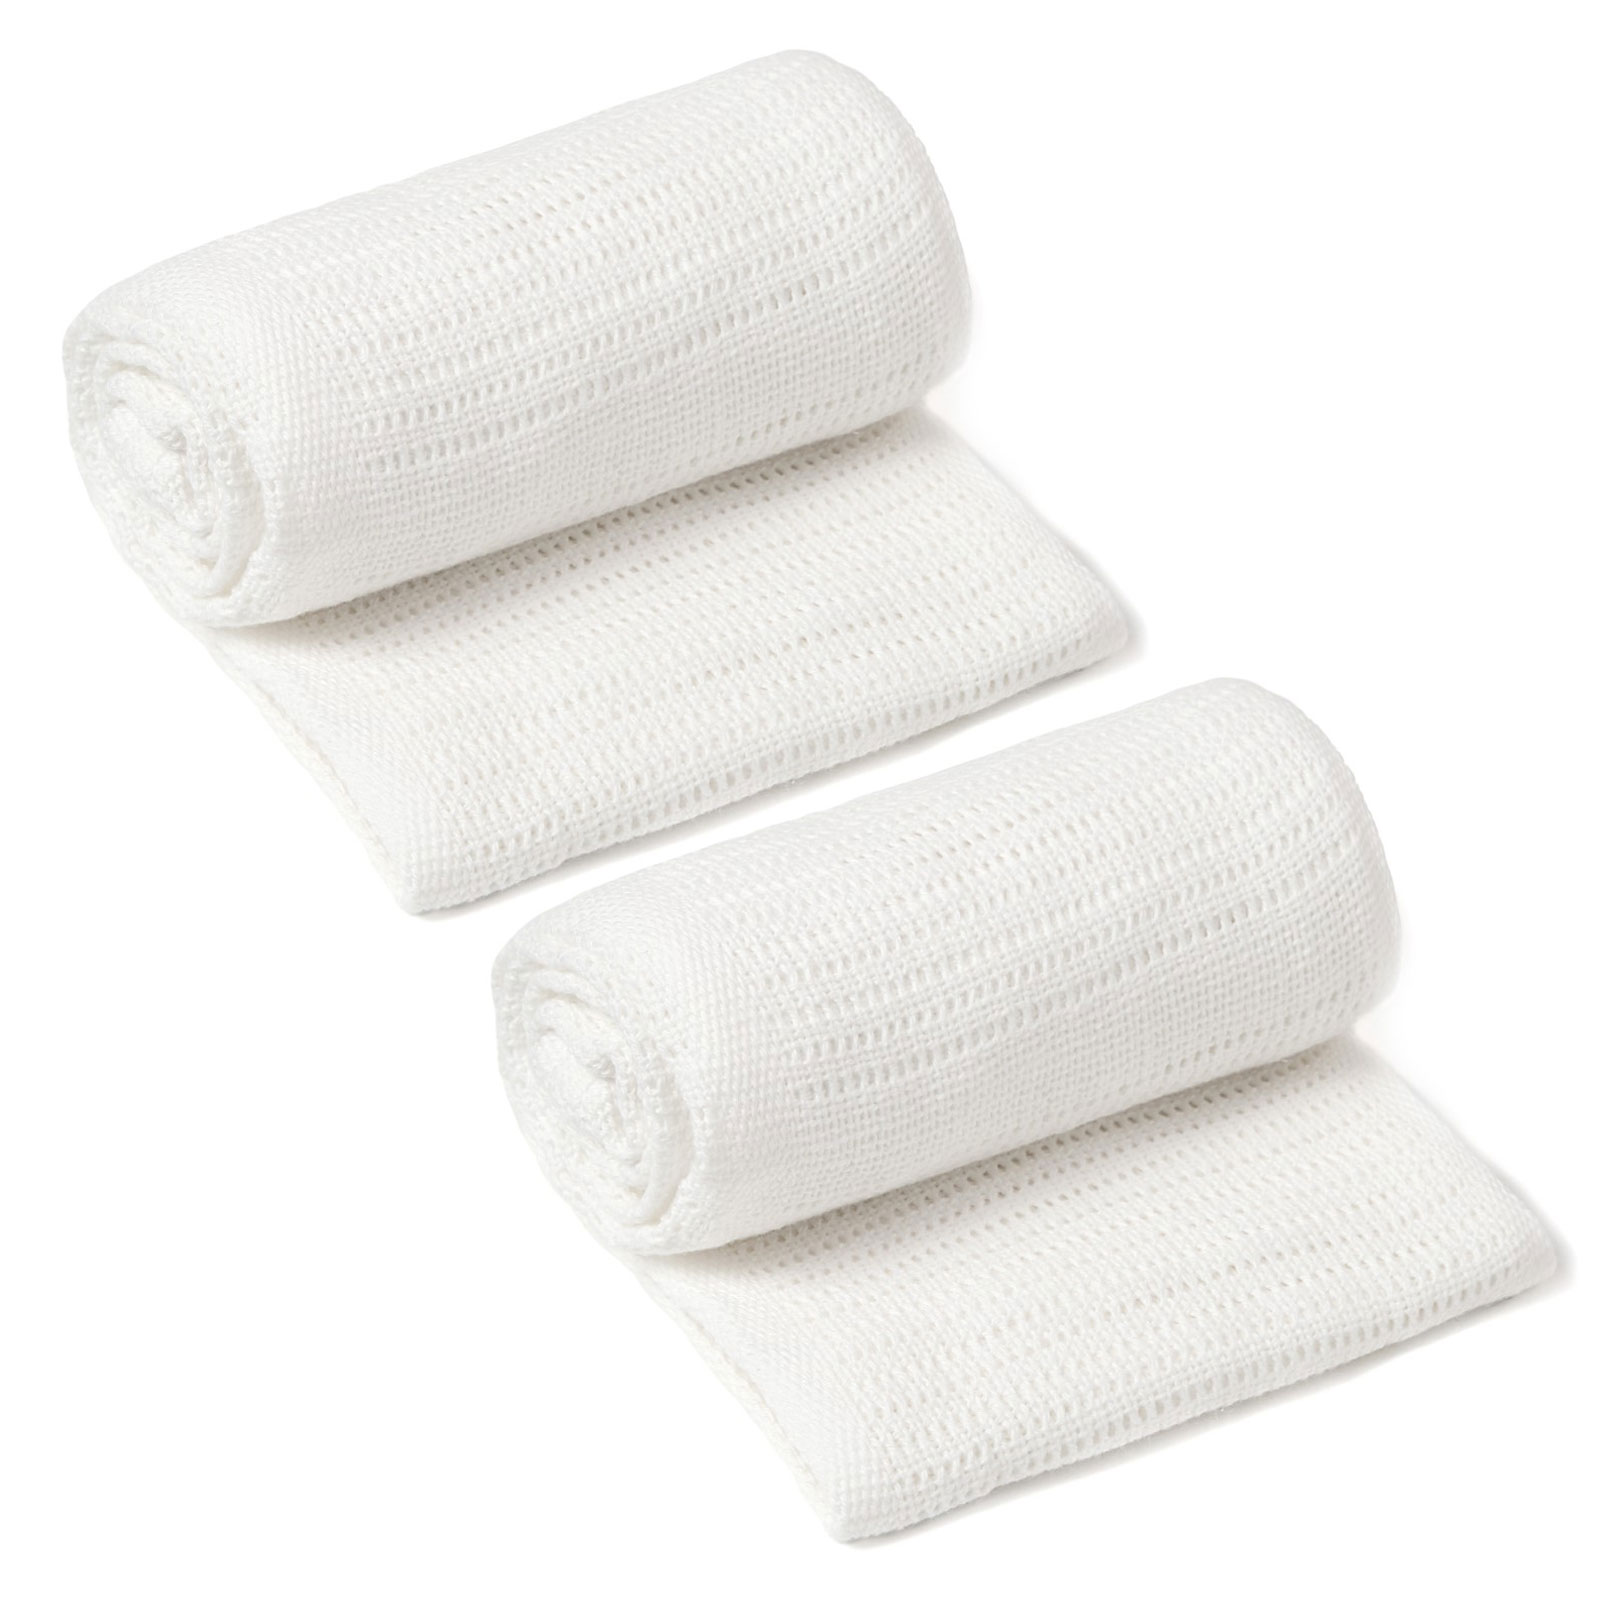 Soft Cotton Cellular Cot / Cotbed Blanket (2 Pack) - White